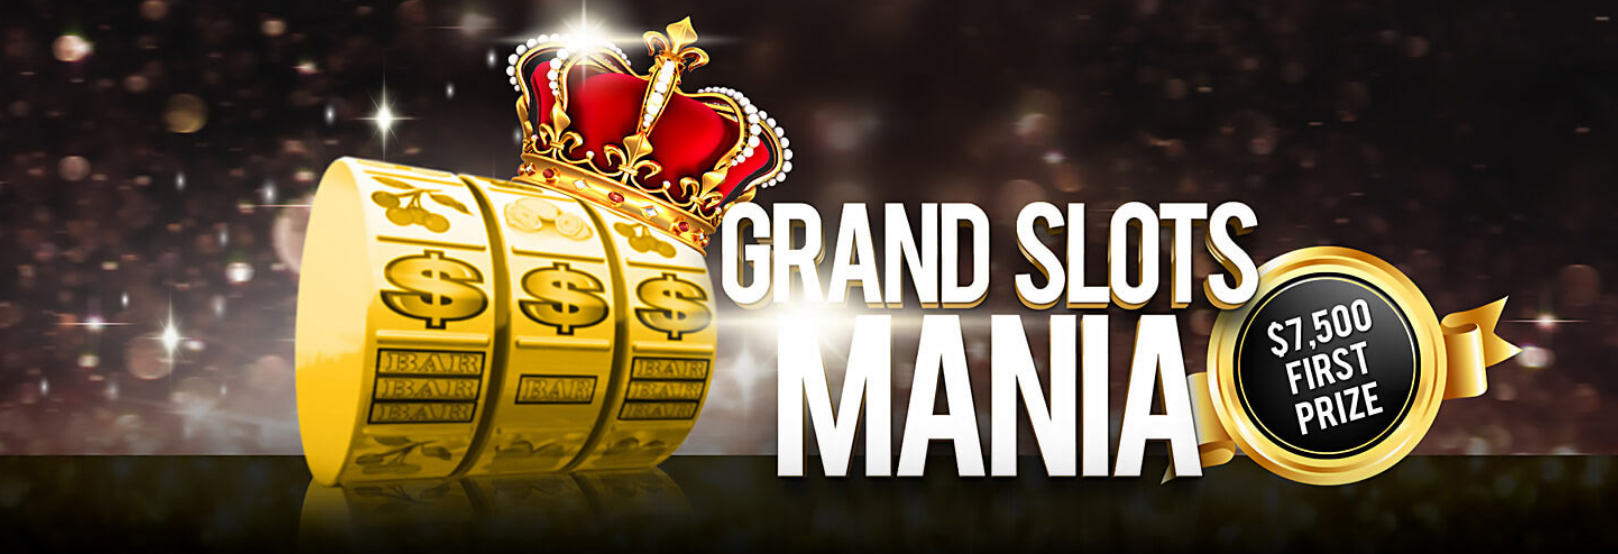 Bag Yourself a First Place Prize of $7,500 in the Grand Slots Mania Promotion at Box 24 Casino